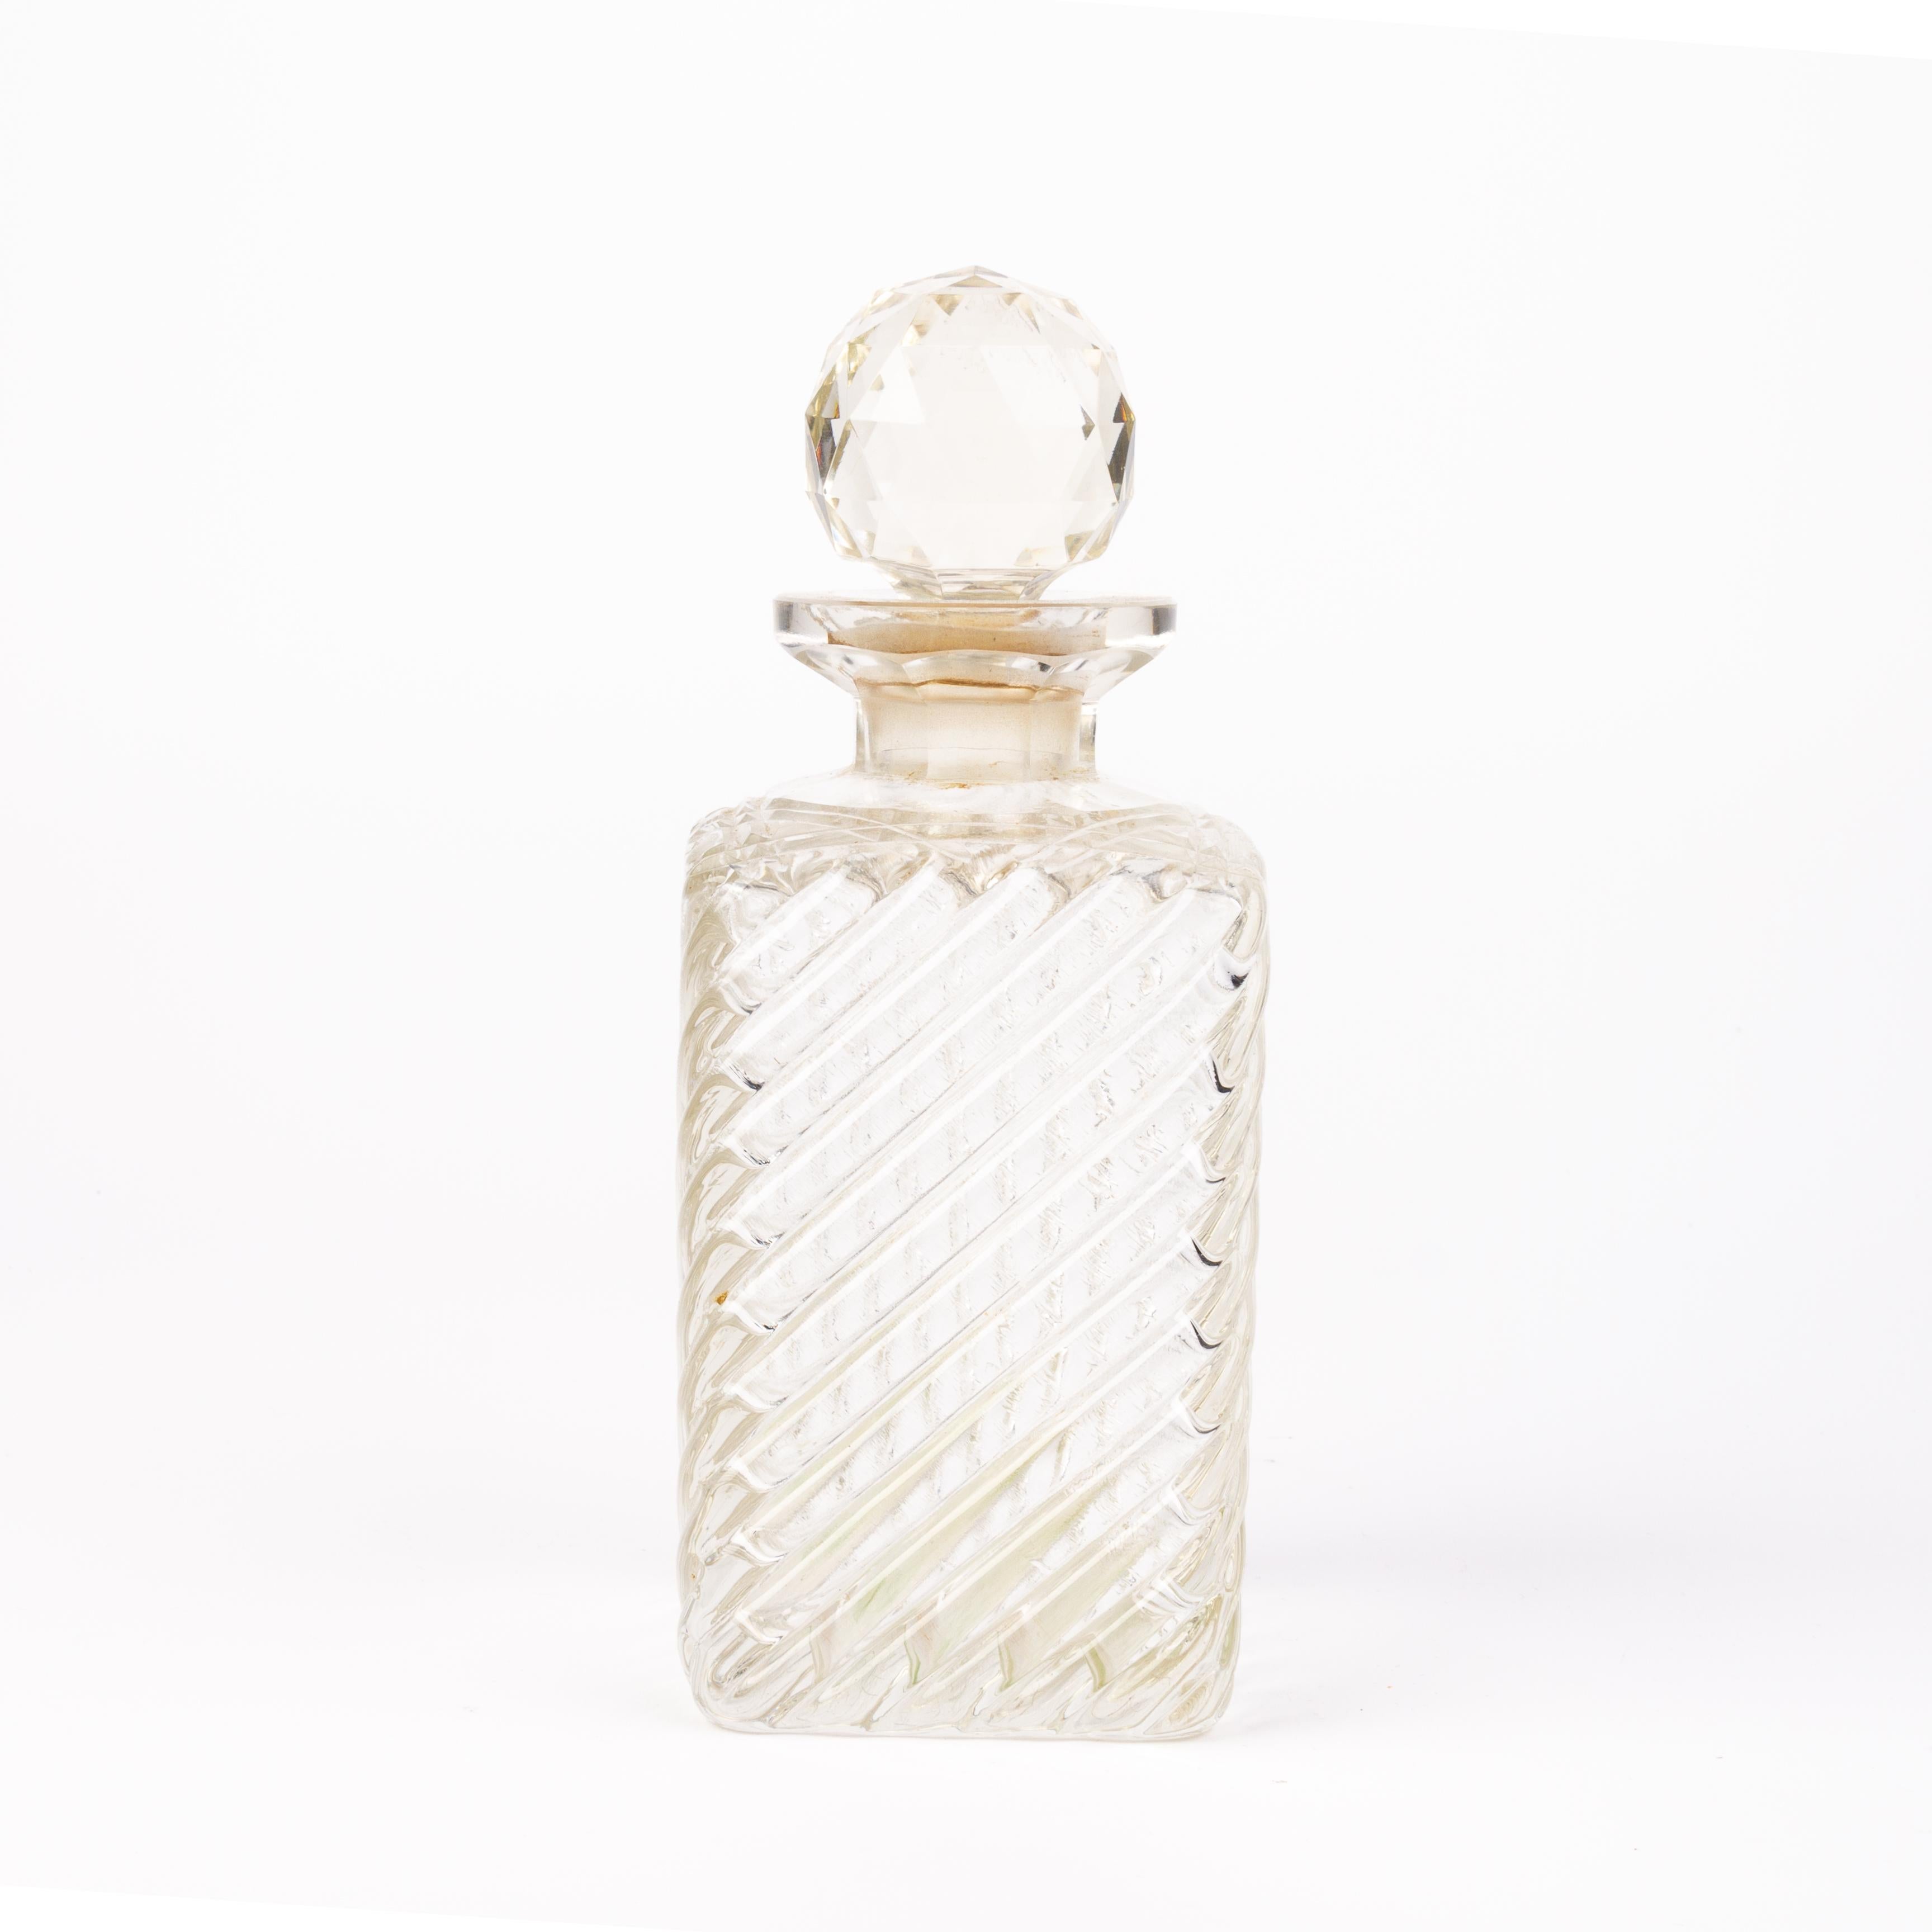 In good condition
From a private collection
Victorian Cut Crystal Glass Spirit Decanter Bottle 